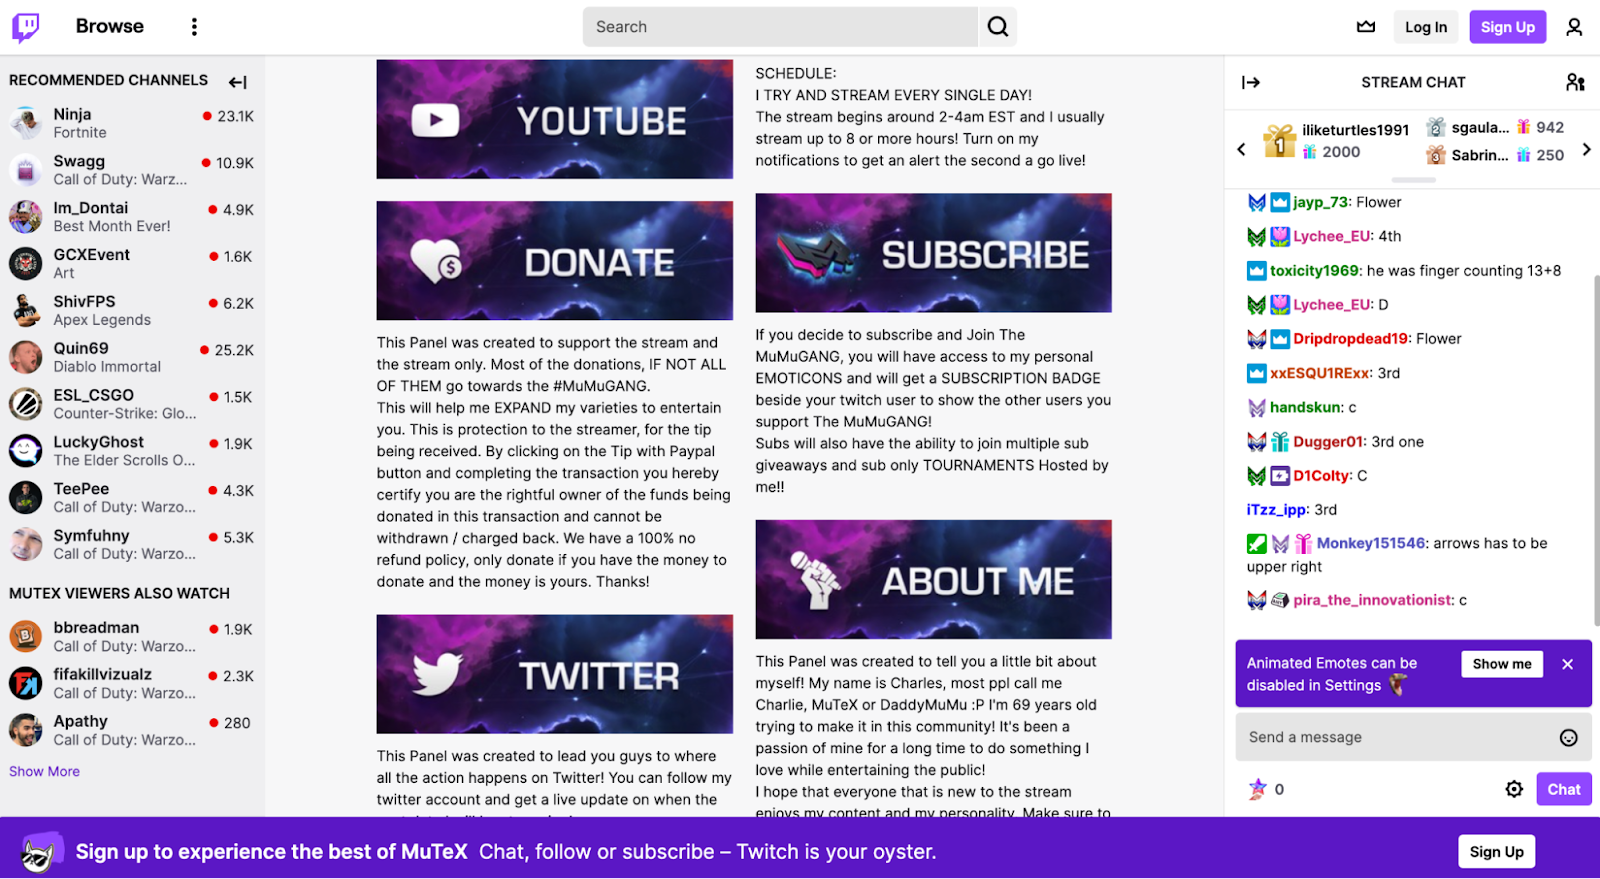 MuTex’s Twitch profile page, with panels with links to other social media and subscription and donate options.